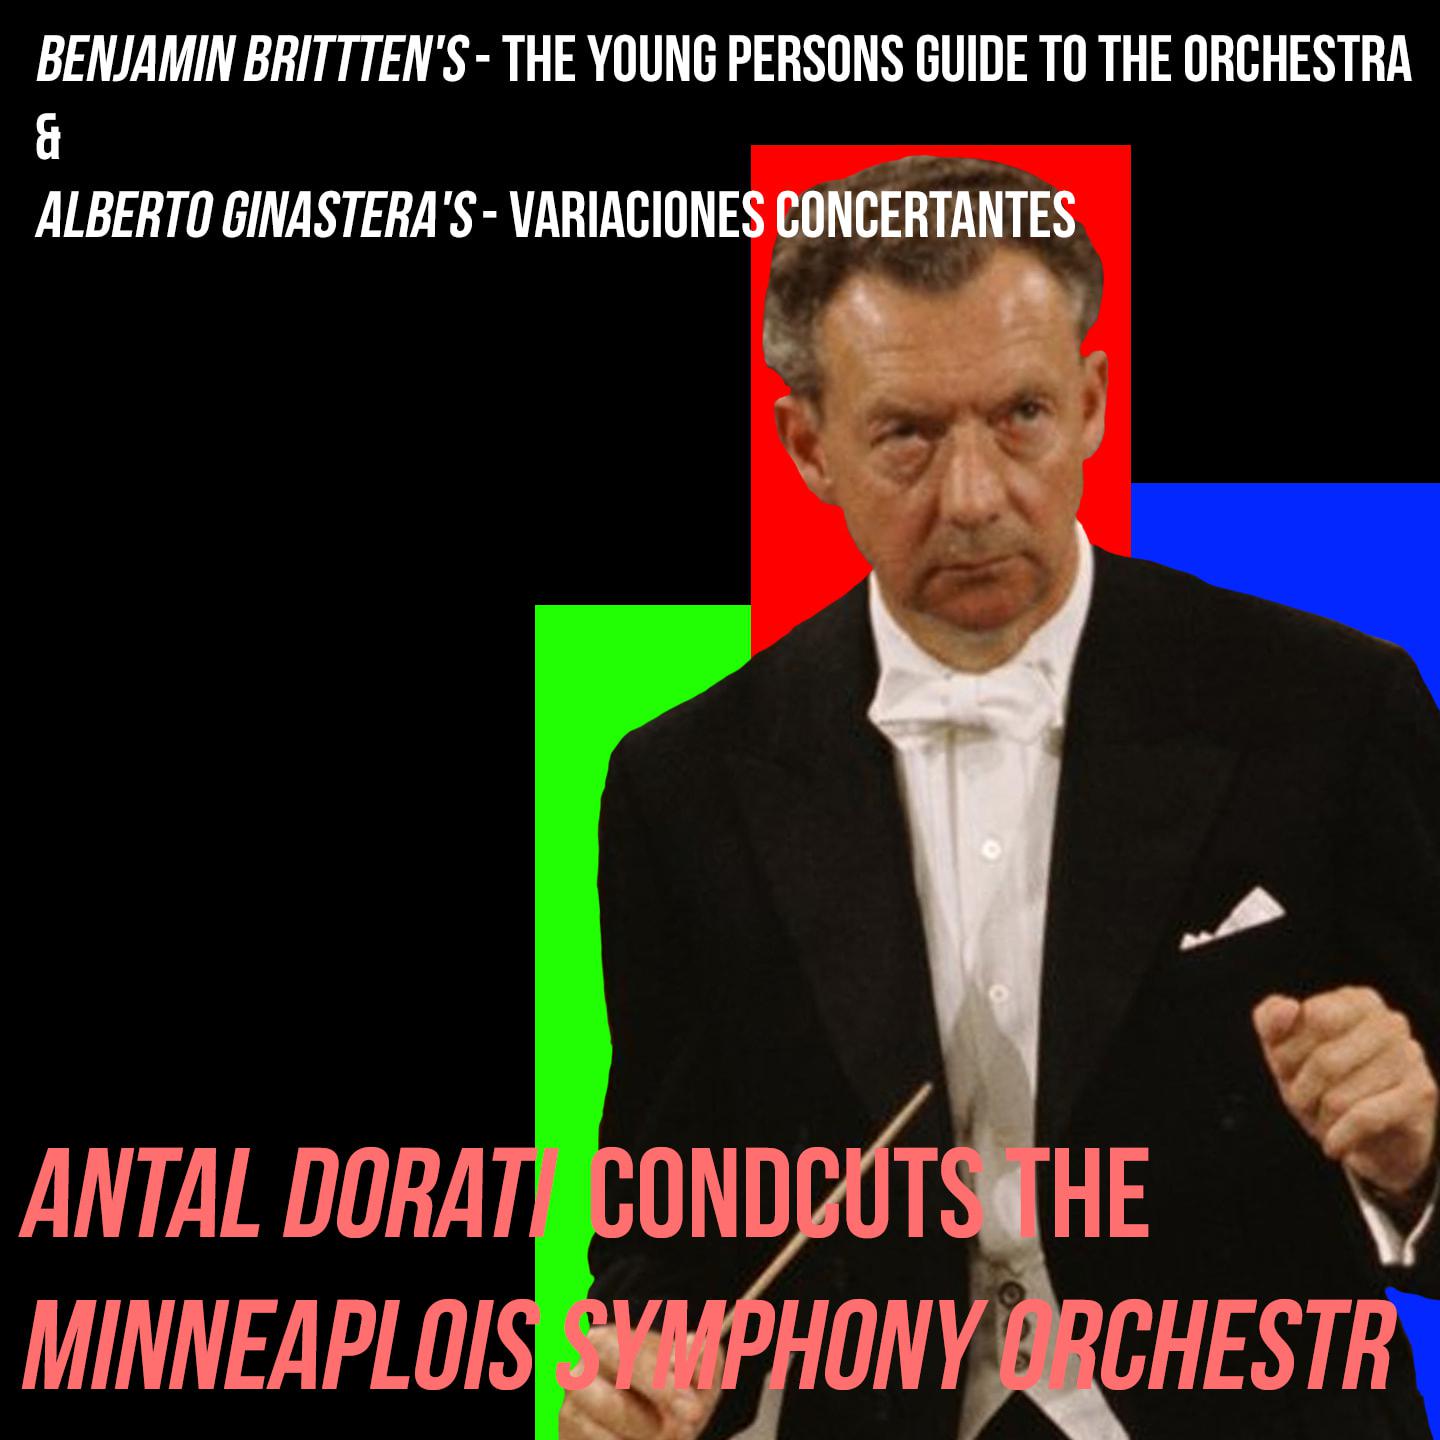 Benjamin Brittten's / The Young Persons Guide To The Orchestra & Alberto Ginastera's / Variaciones Concertantes